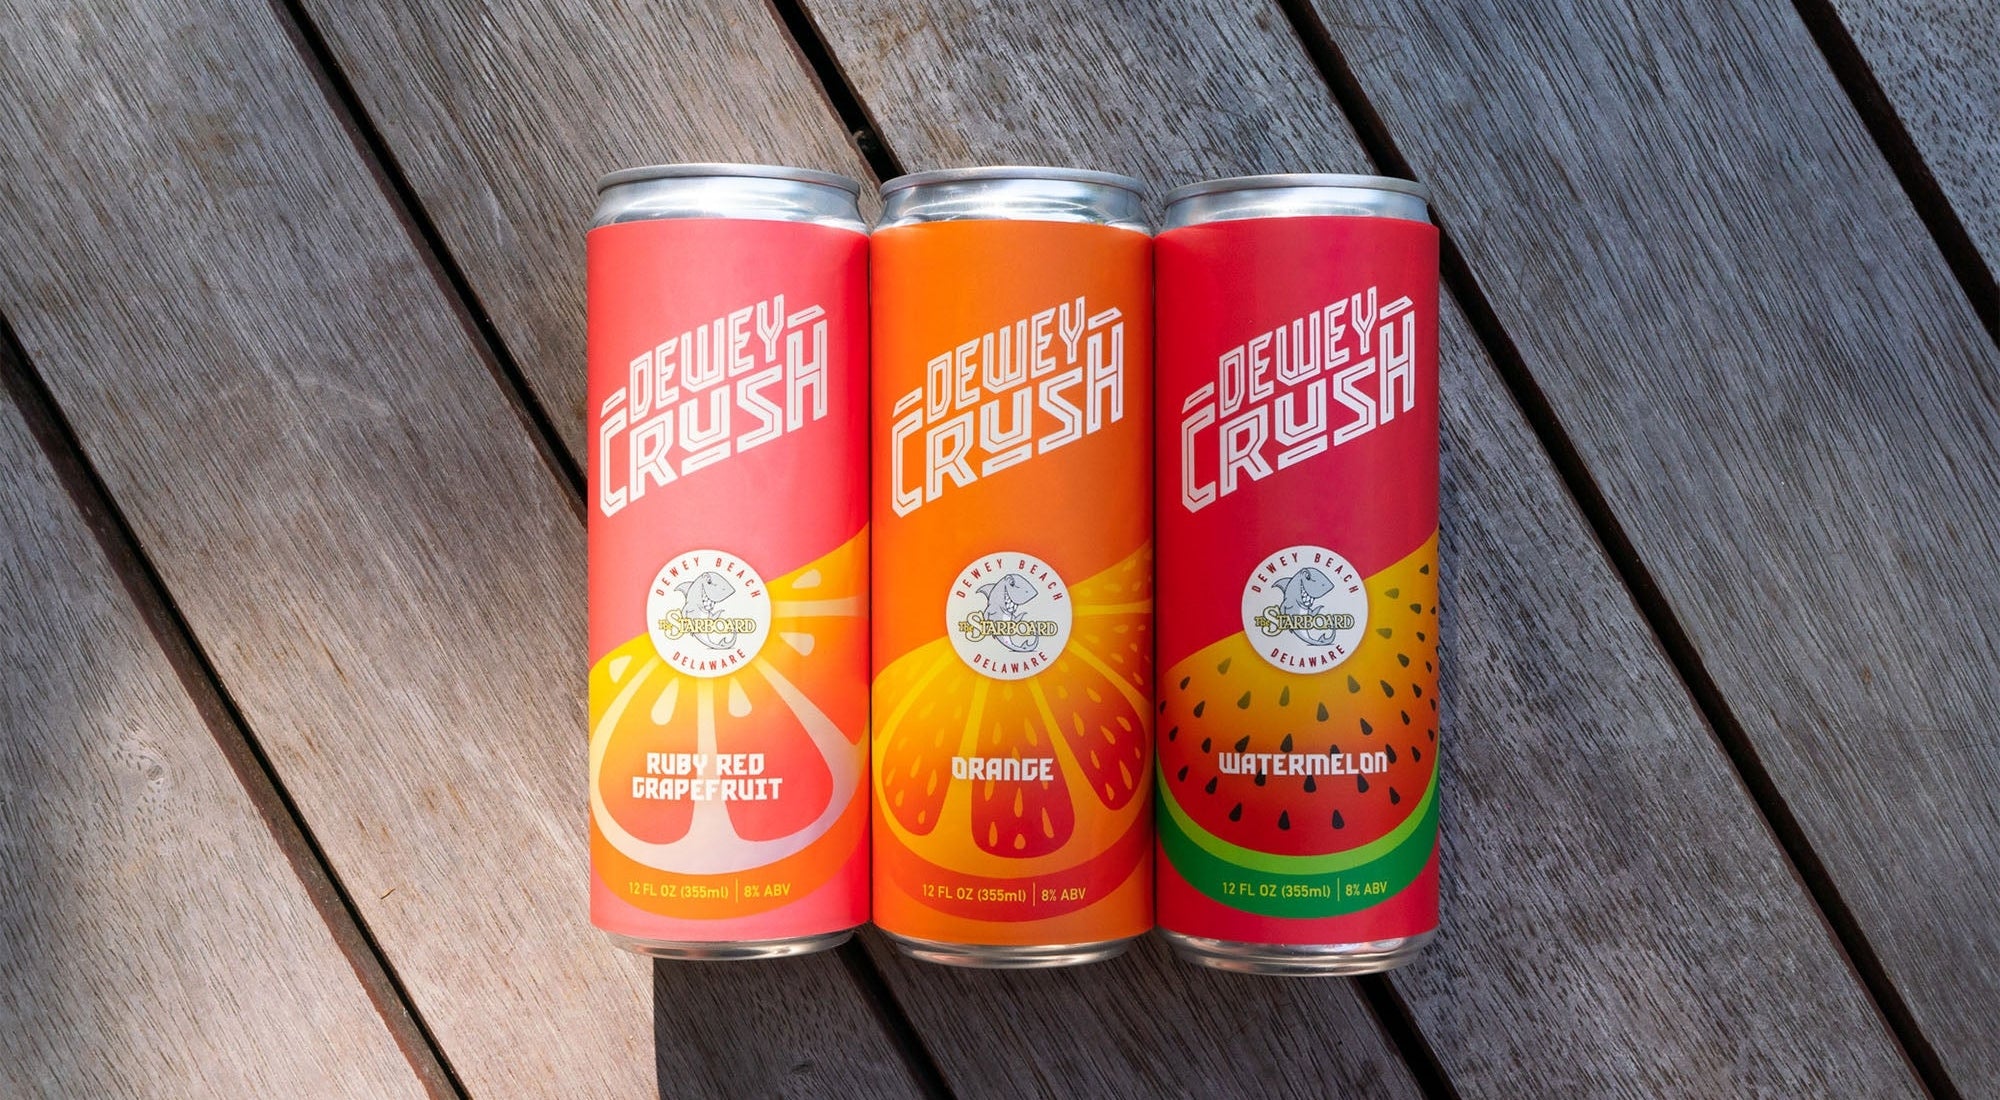 Dewey Crush Canned the Original Starboard Crush Cocktail